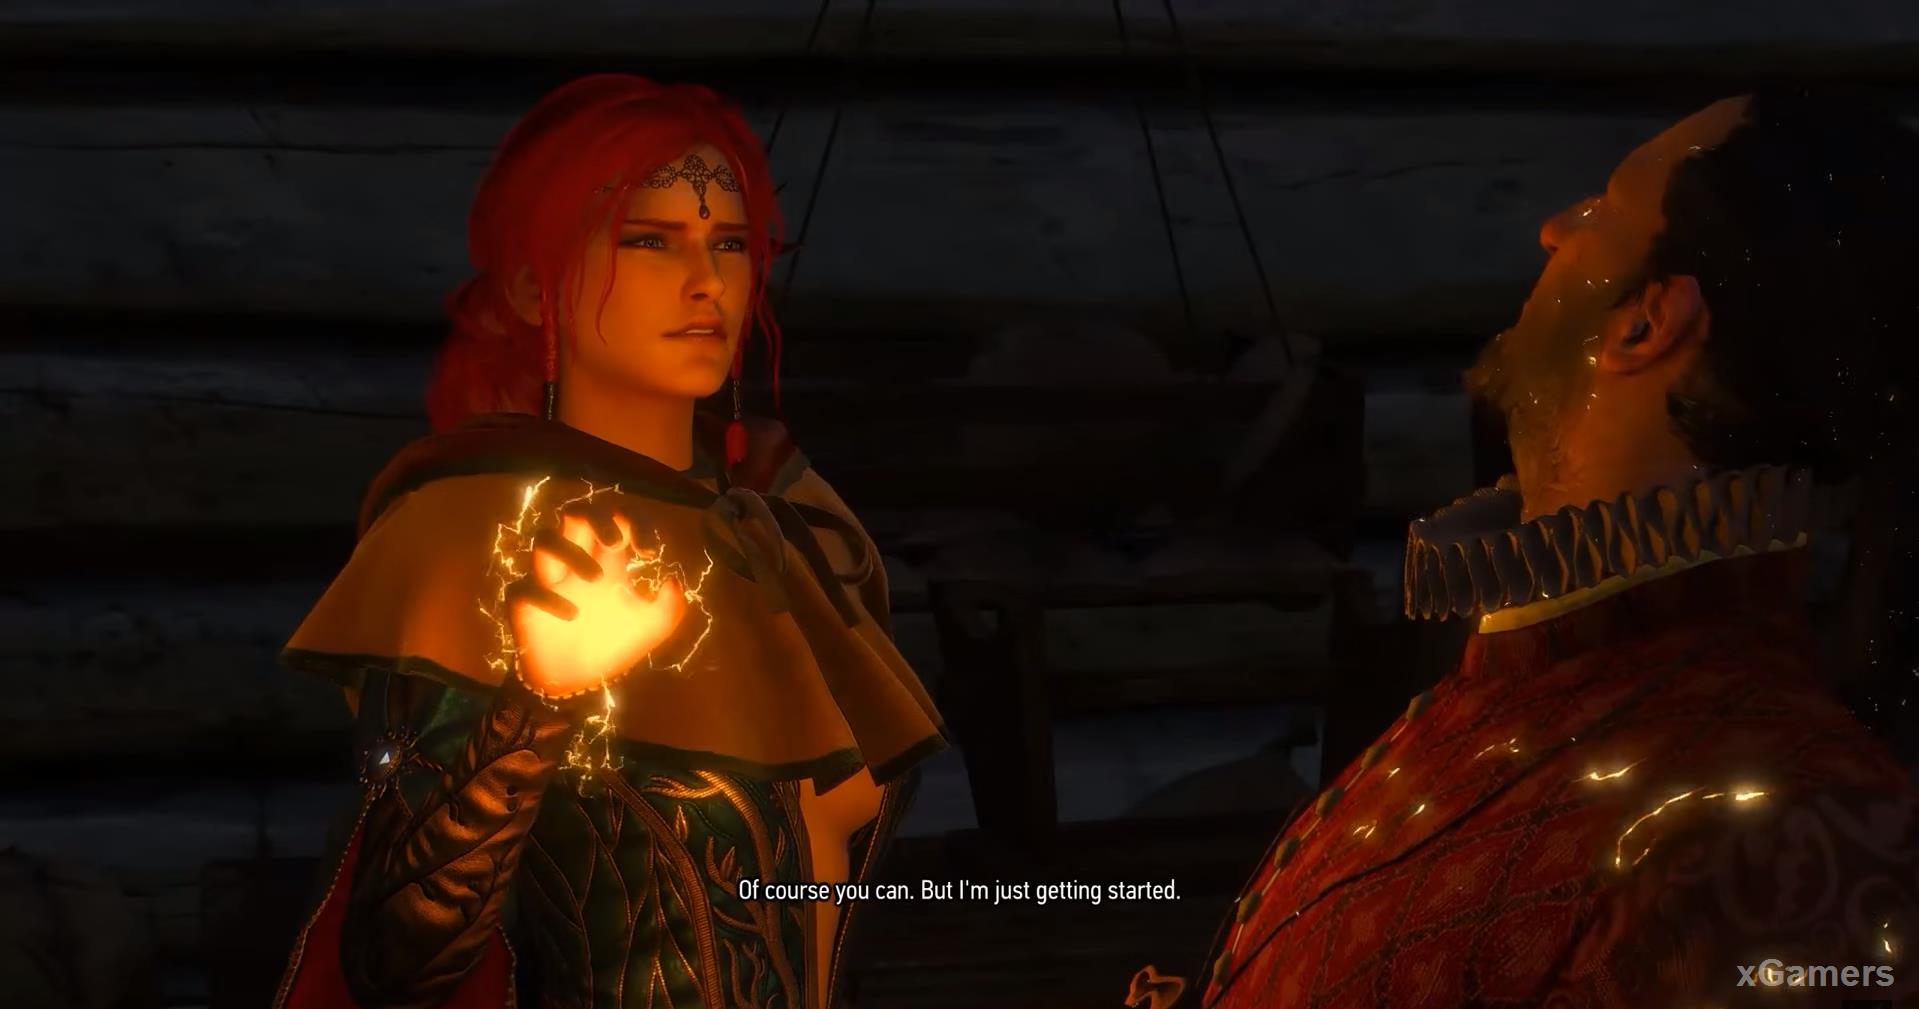 Triss will apply a painful spell to him, and you should not stop the sorceress